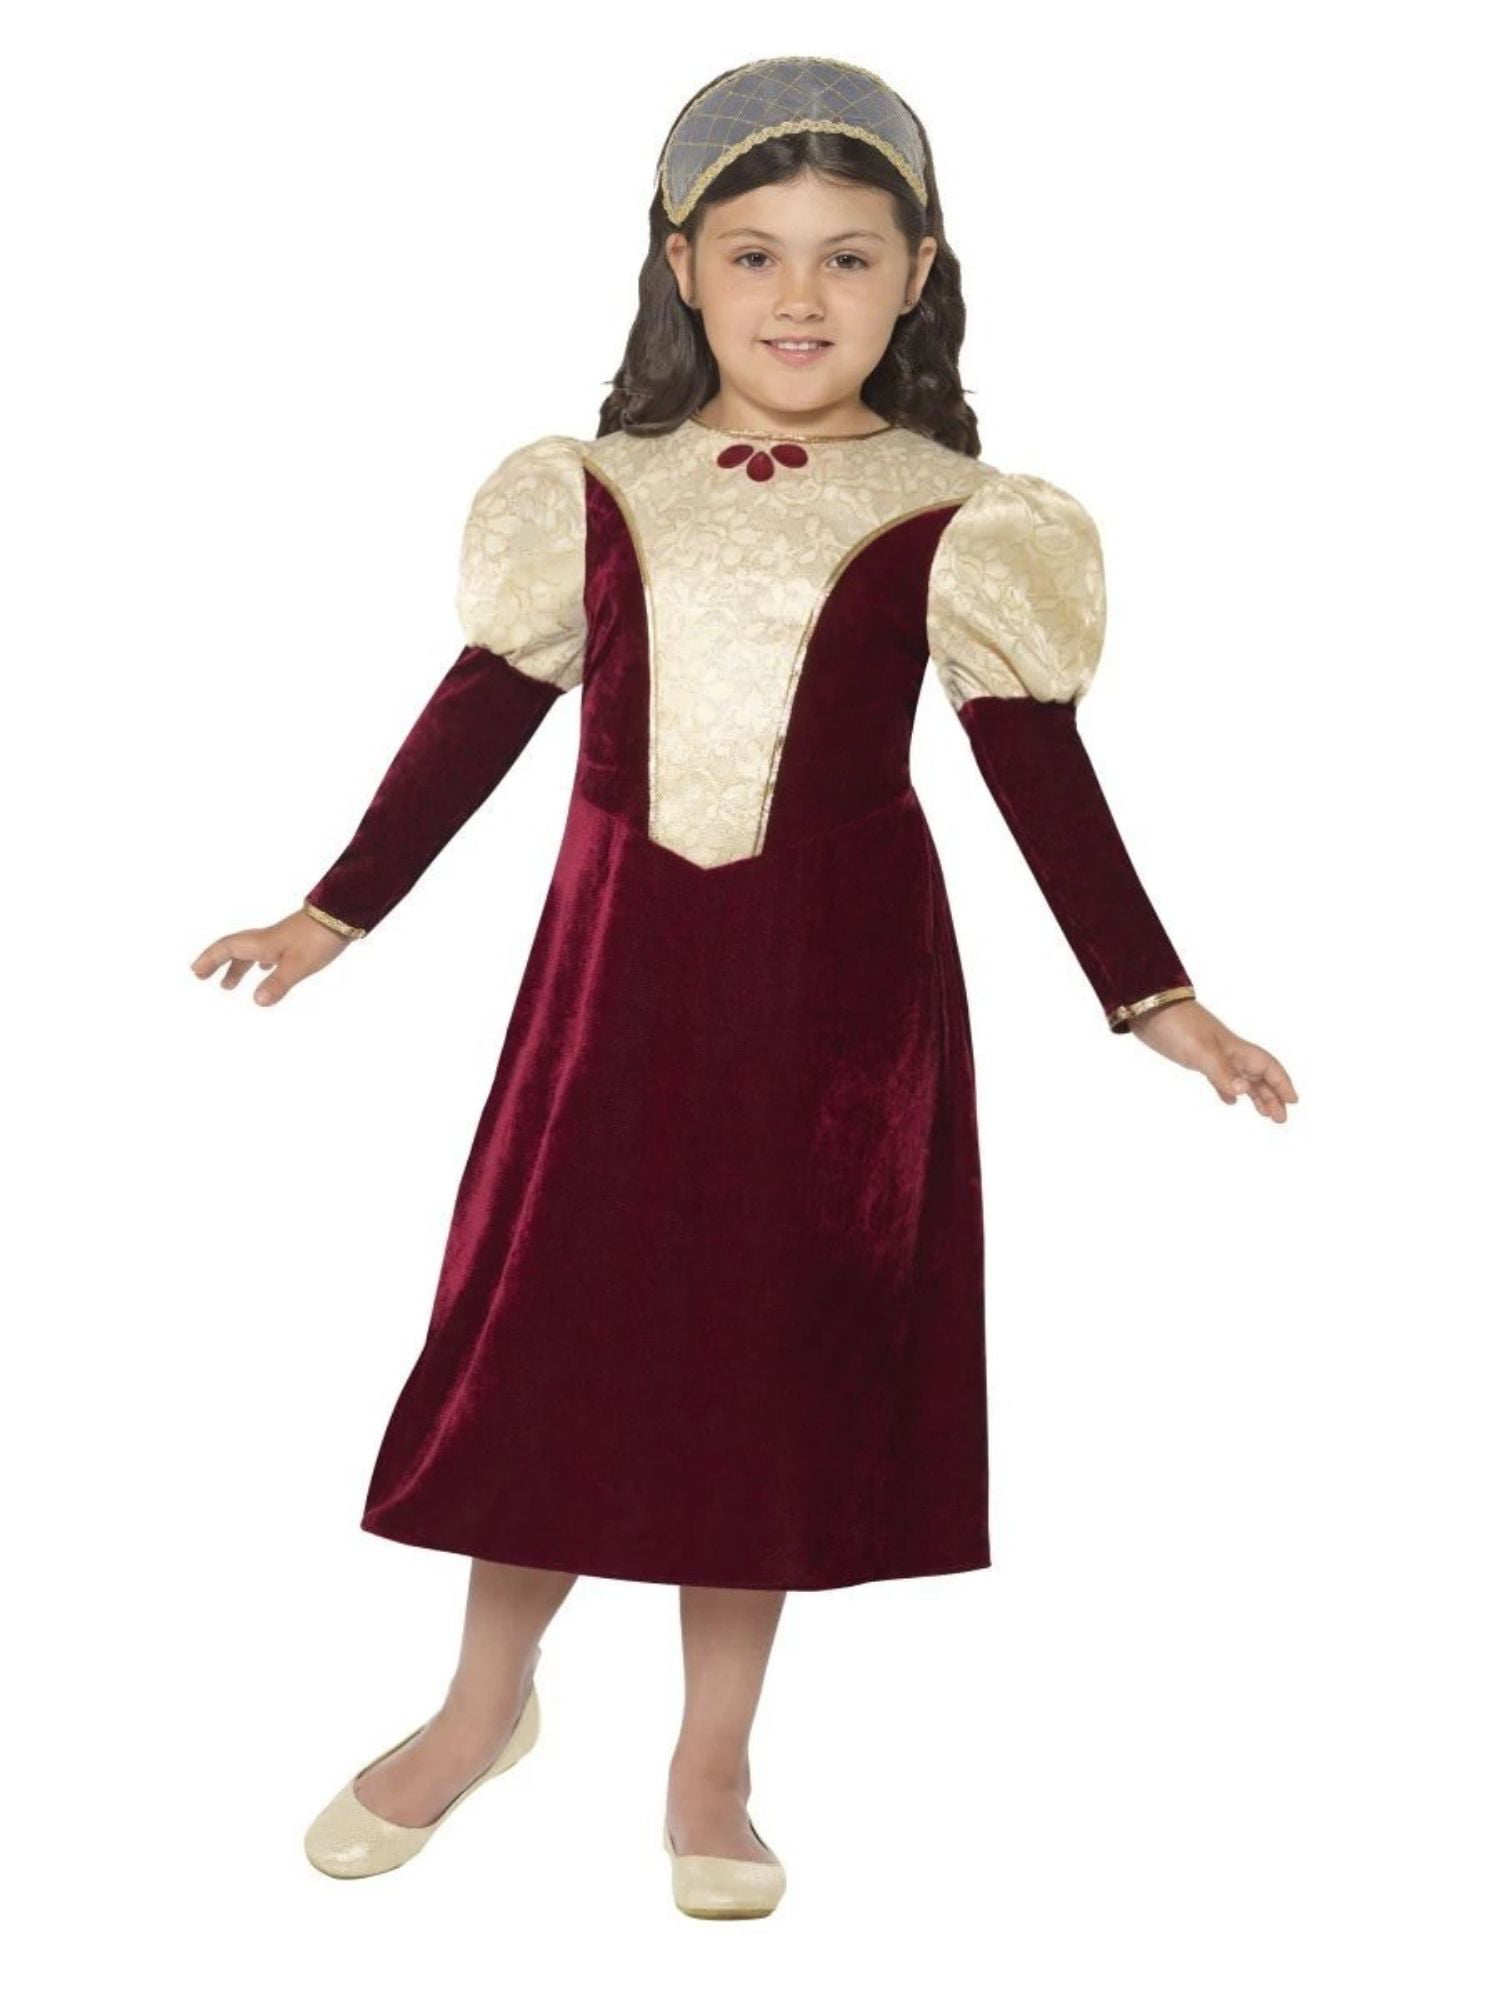 Childrens Girls Fancy Dress Tudor Girl Costume Book Day Childs Outfit by Smiffys 